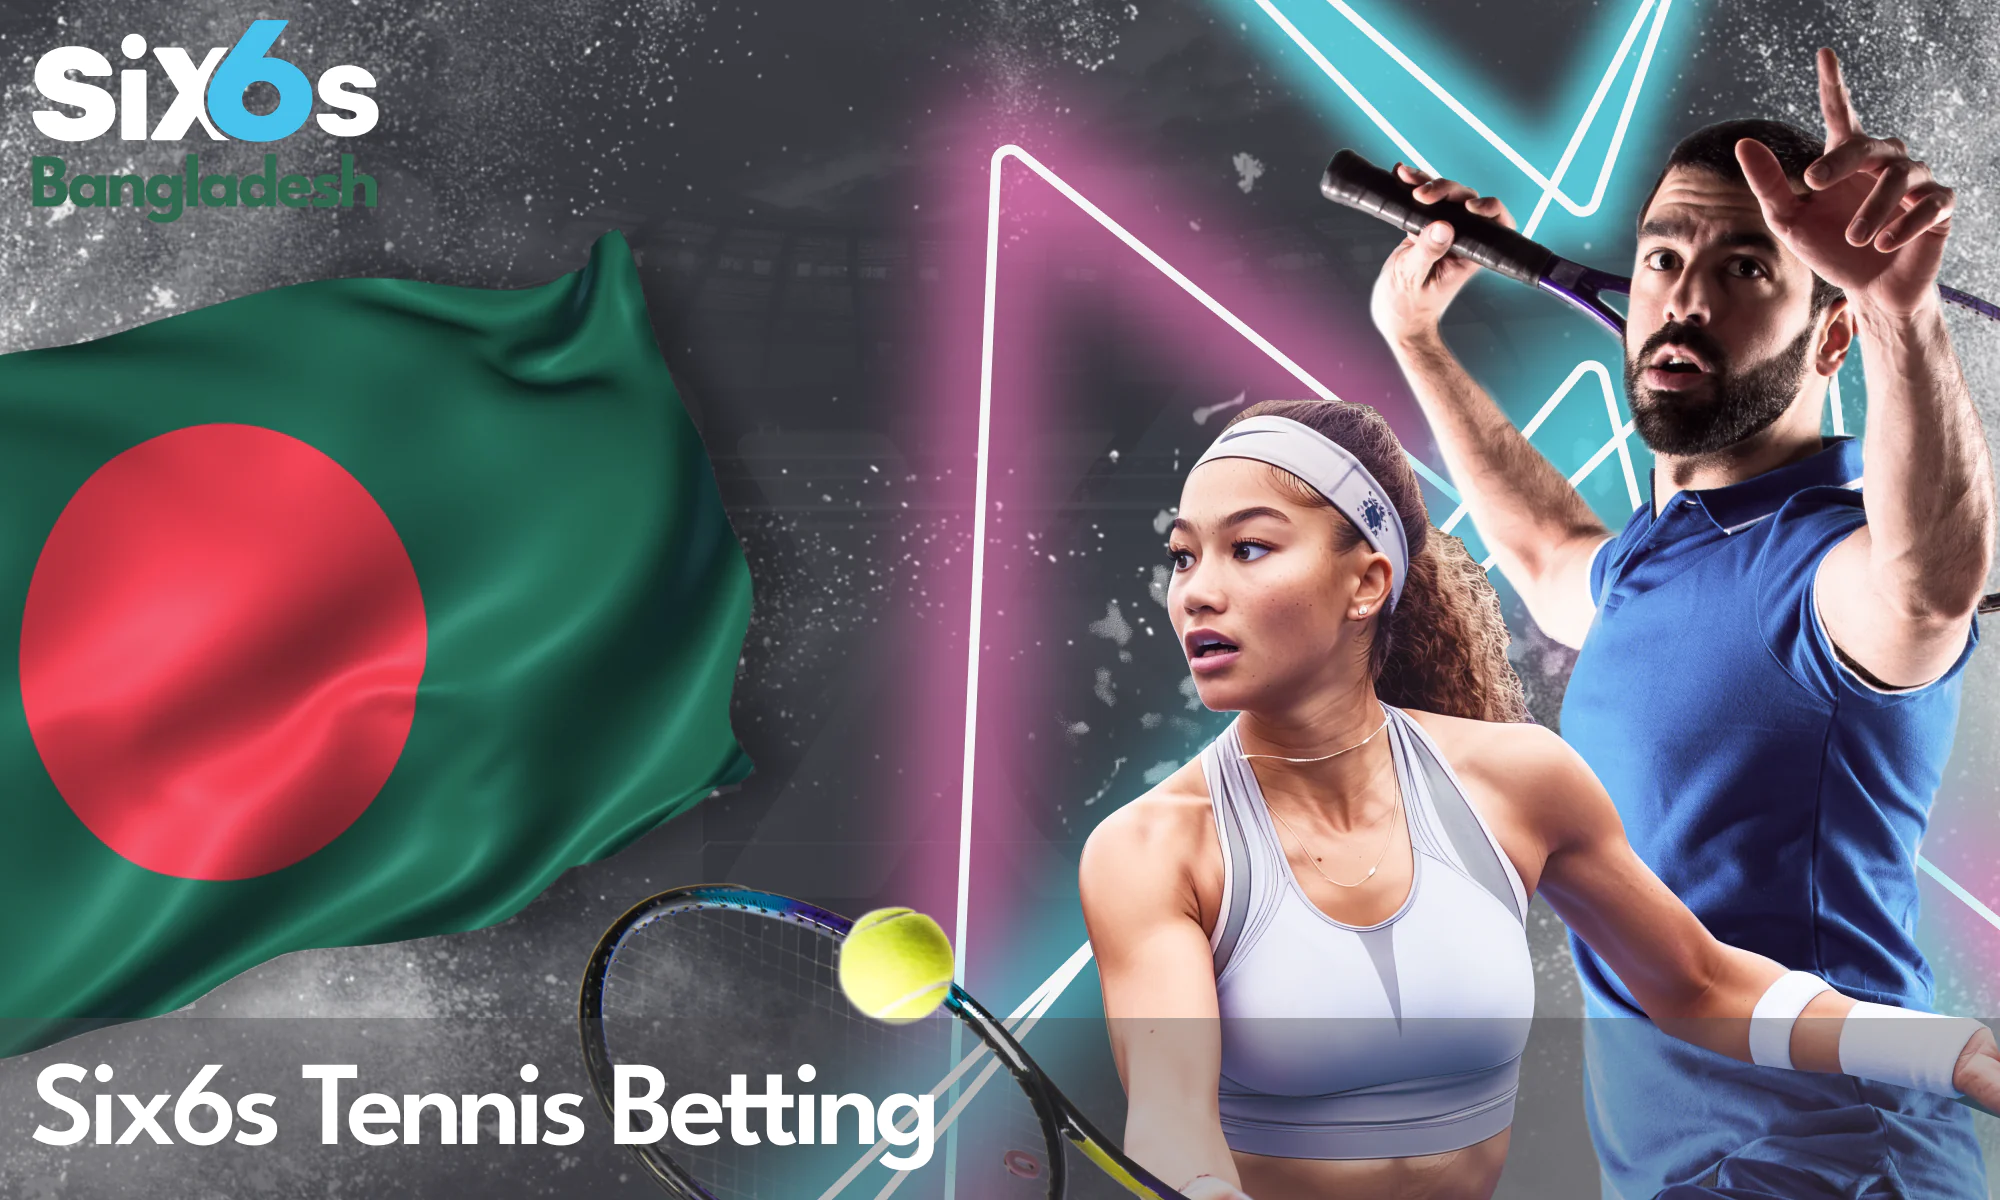 Tennis betting for Six6s players from Bangladesh